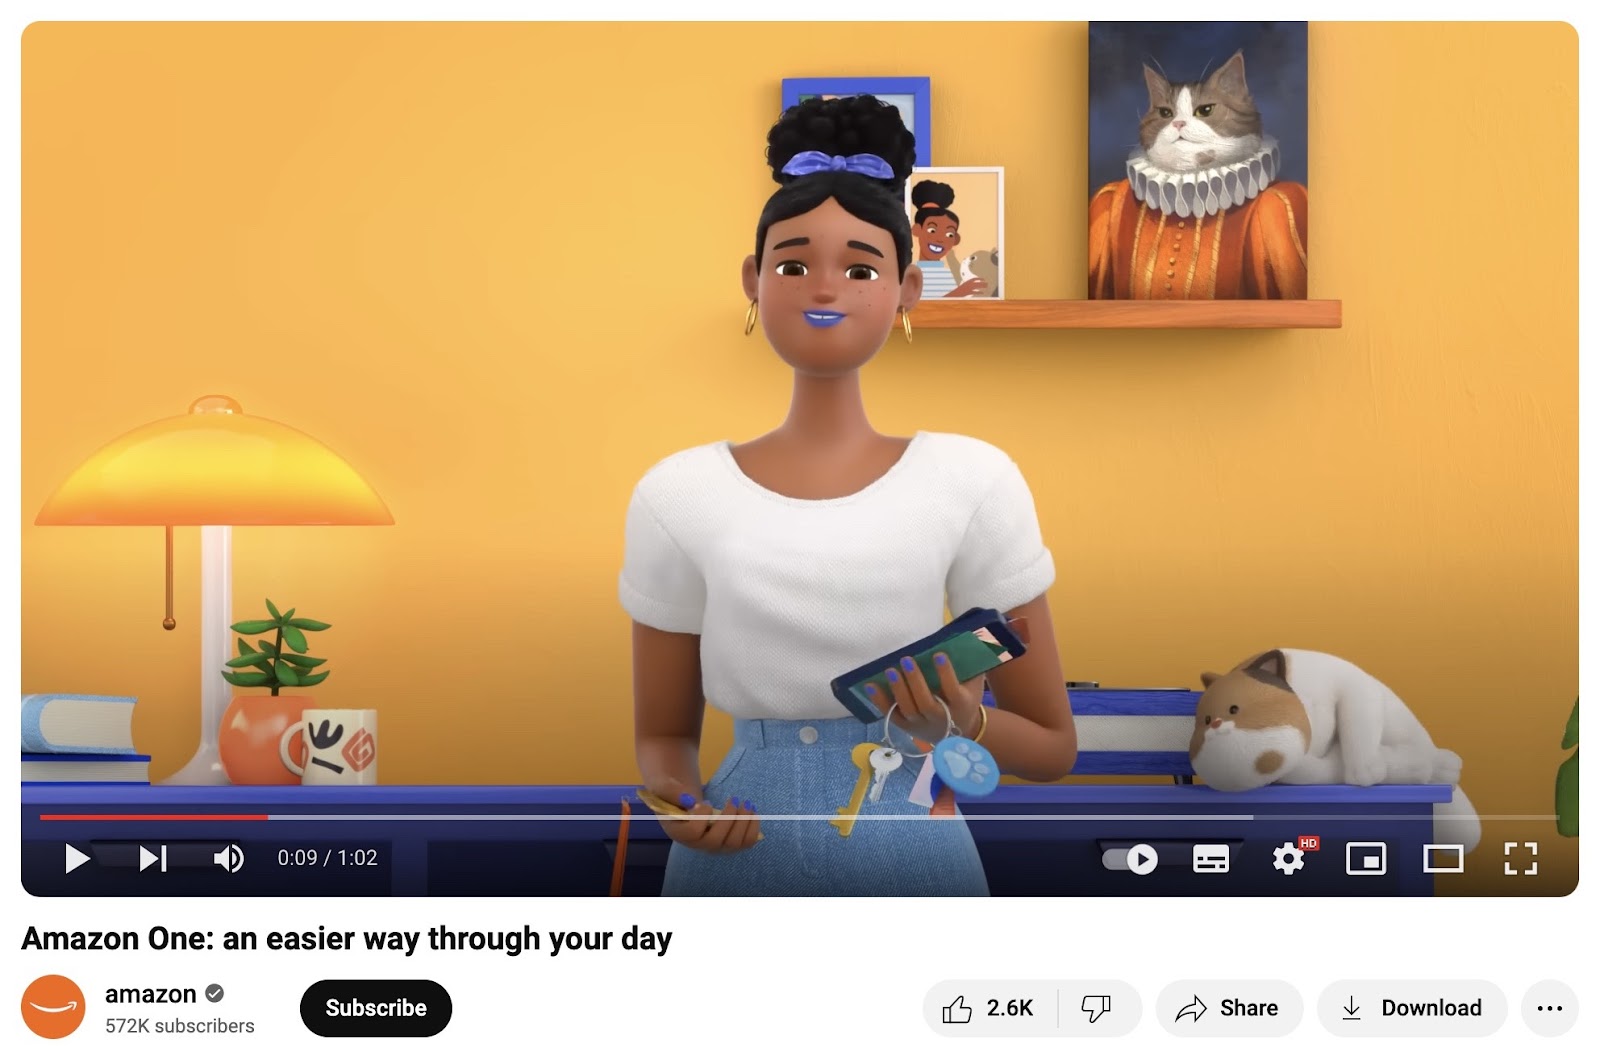 Amazon One's animated video on an easier way to get through your day